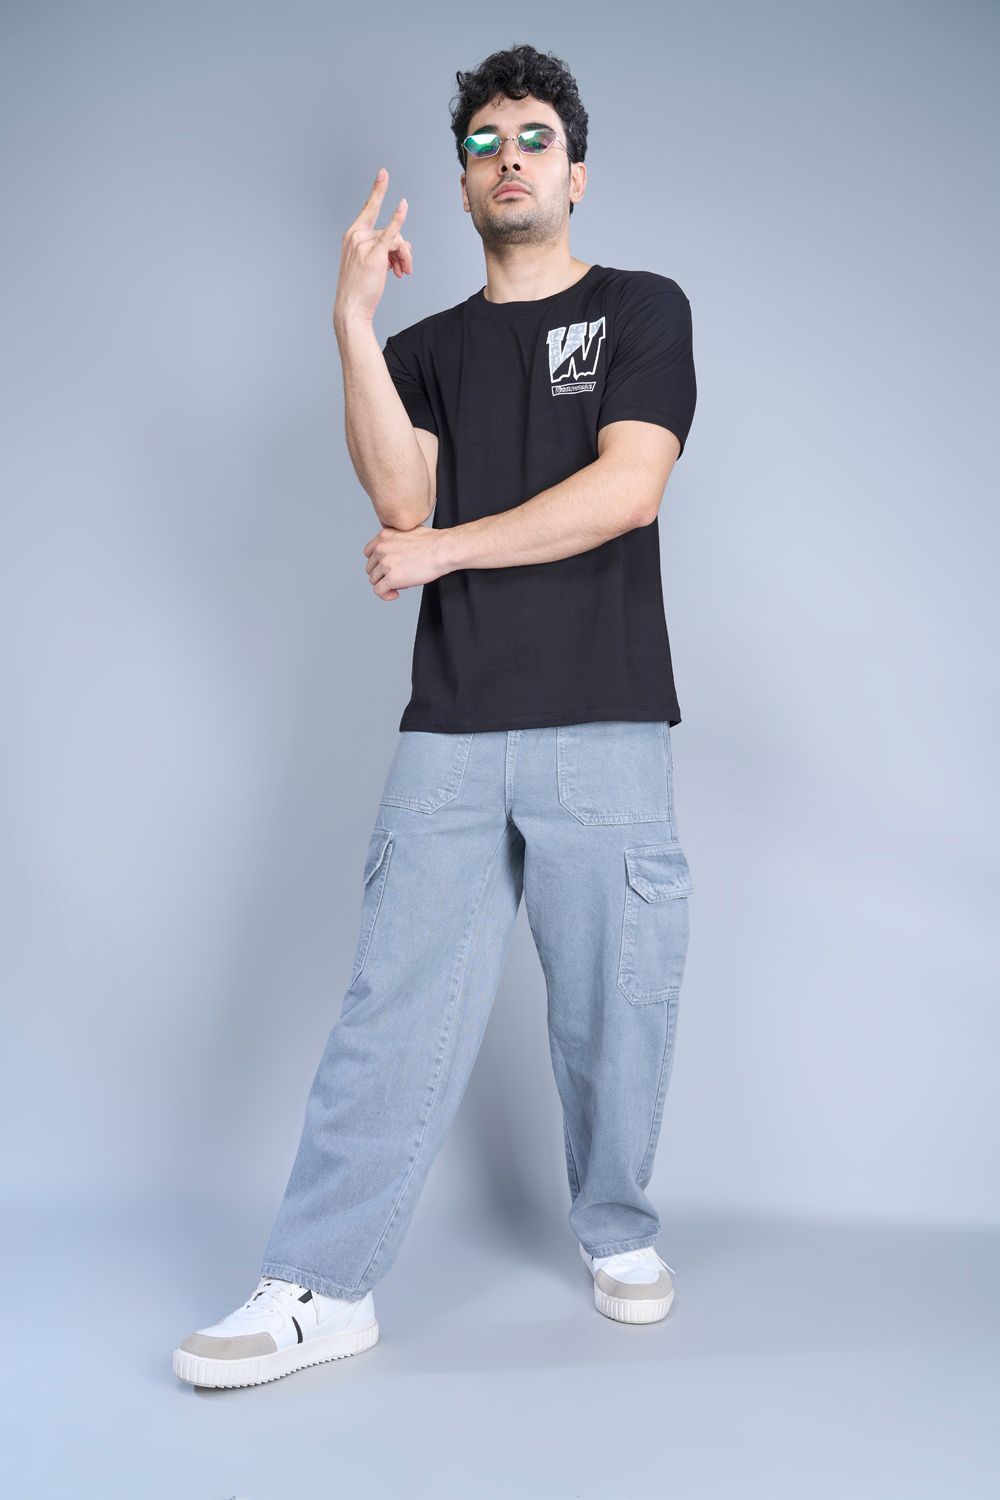 Cotton oversized T shirt for men in the solid color black with half sleeves and crew neck, front view.